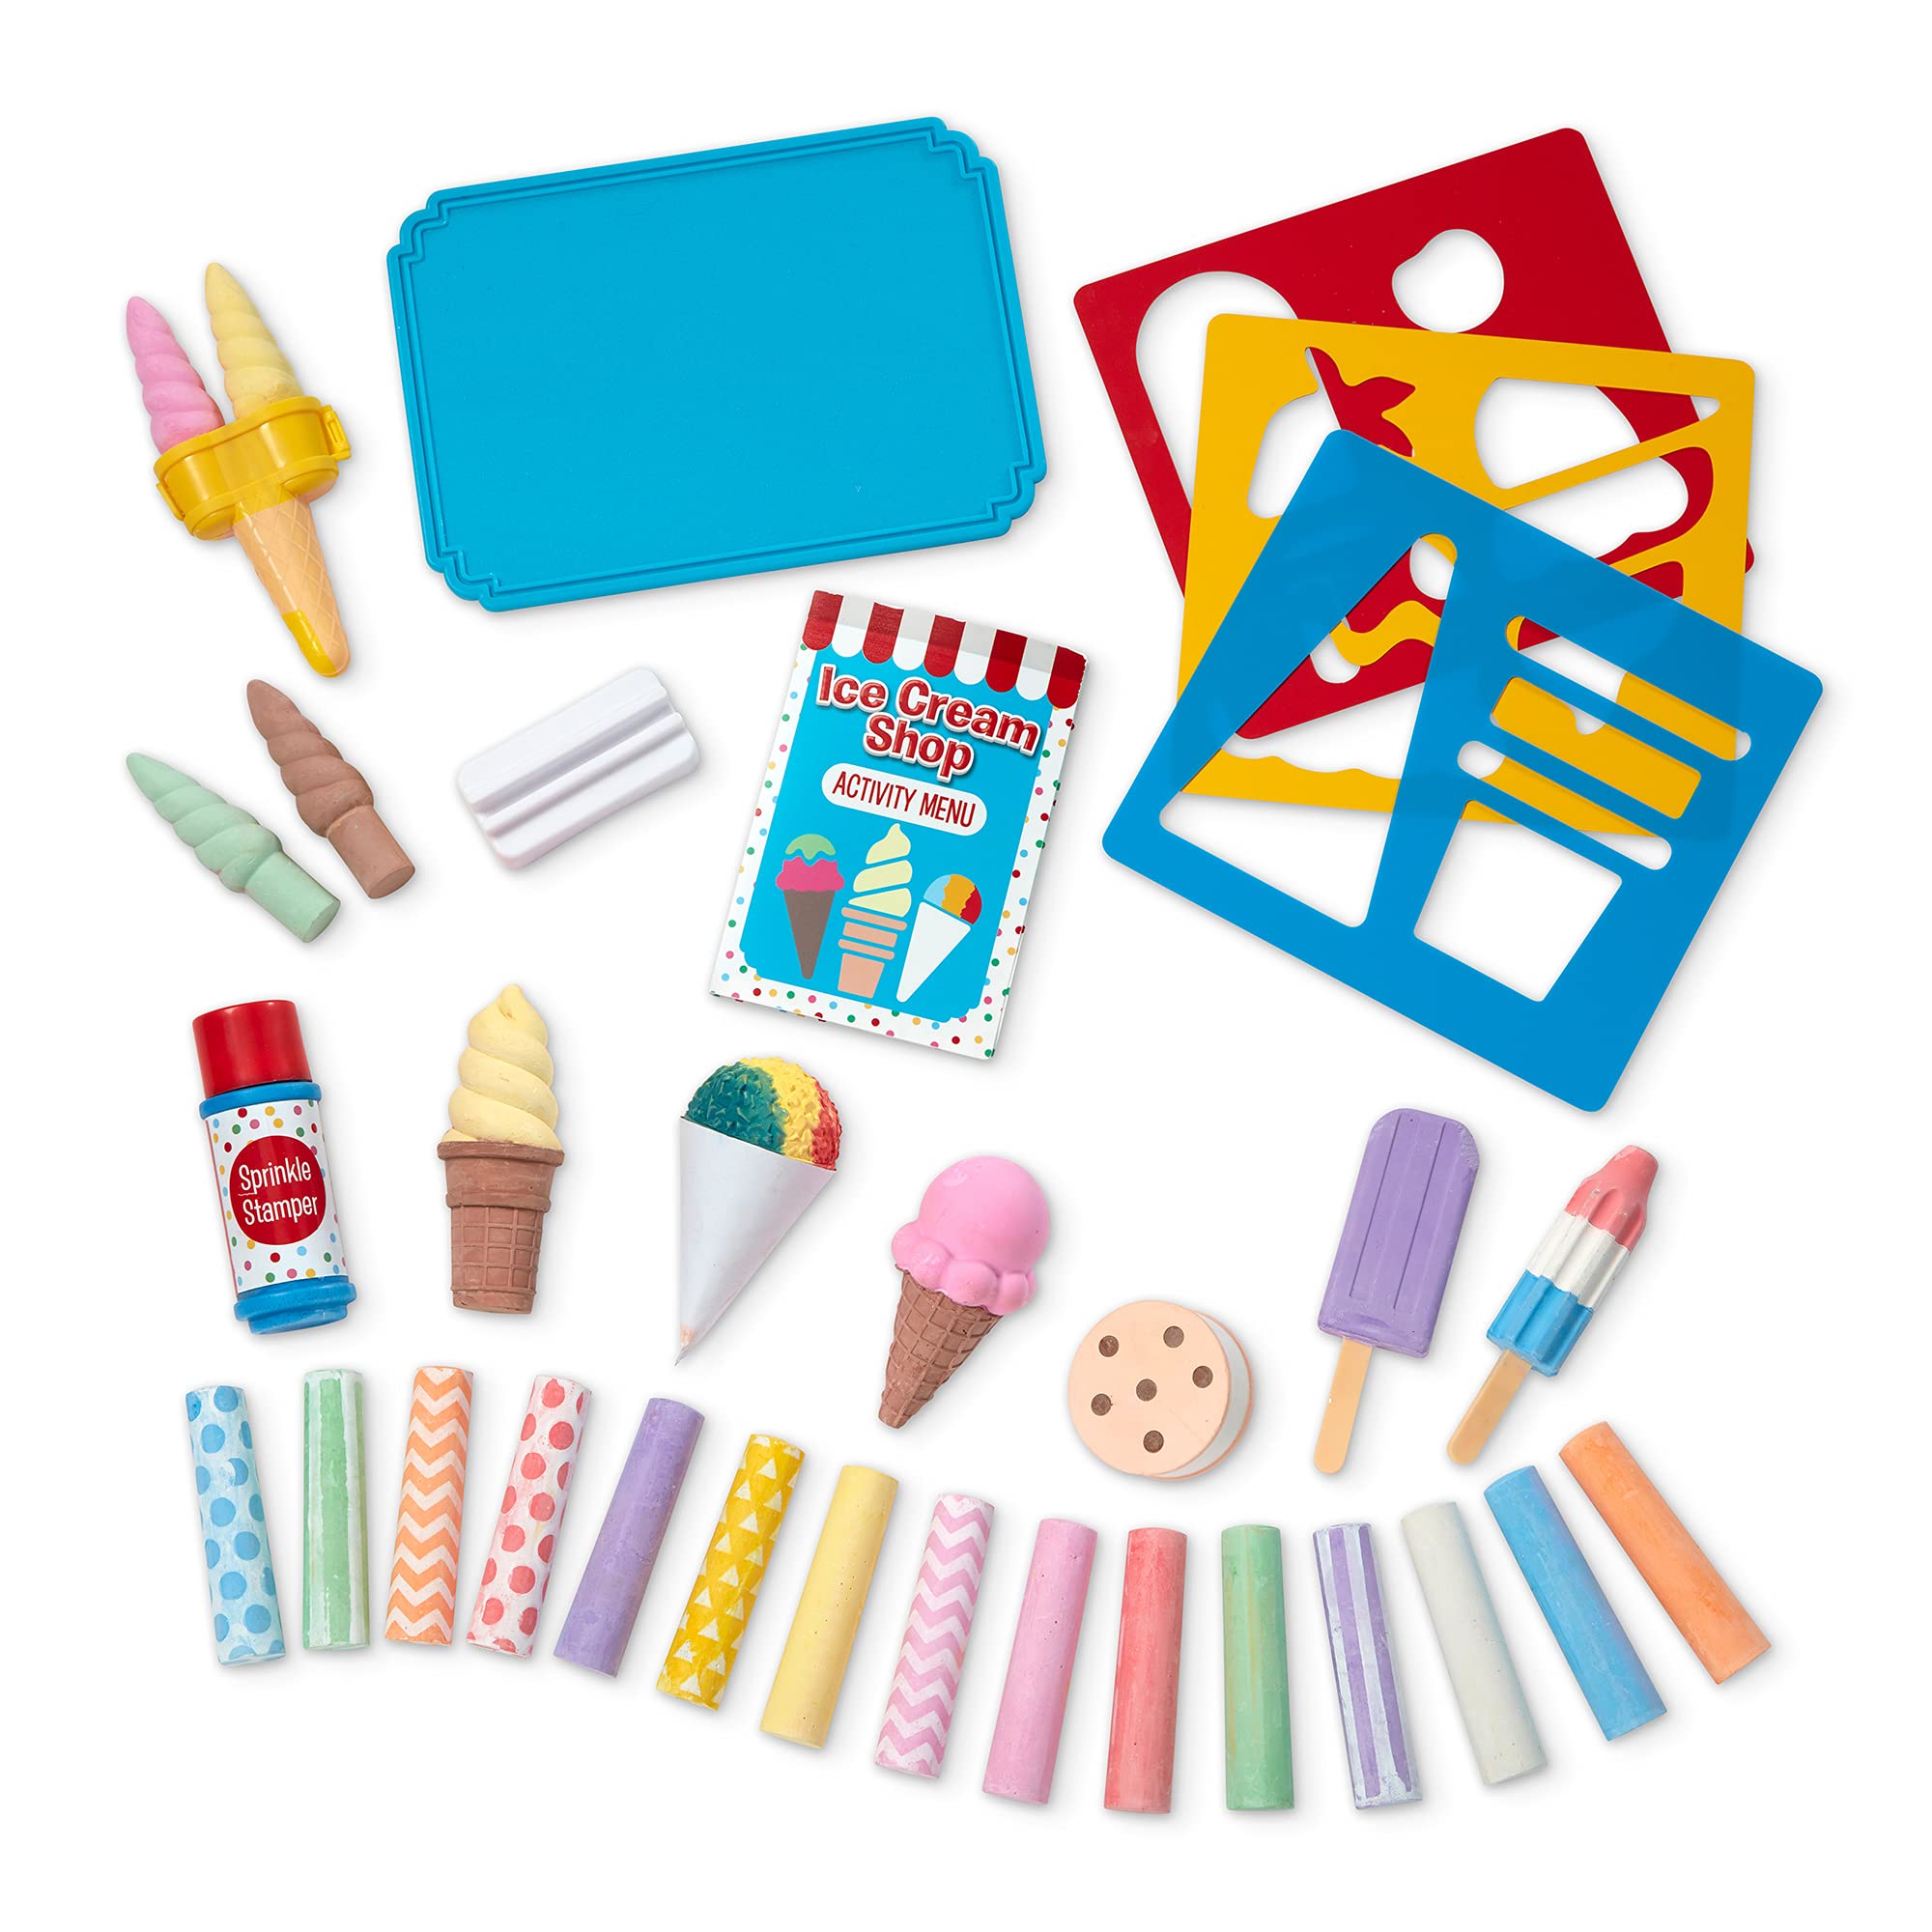 33-Piece Melissa & Doug Ice Cream Shop Multi-Colored Chalk Play Set $9.83 + Free Shipping w/ Prime or on $25+